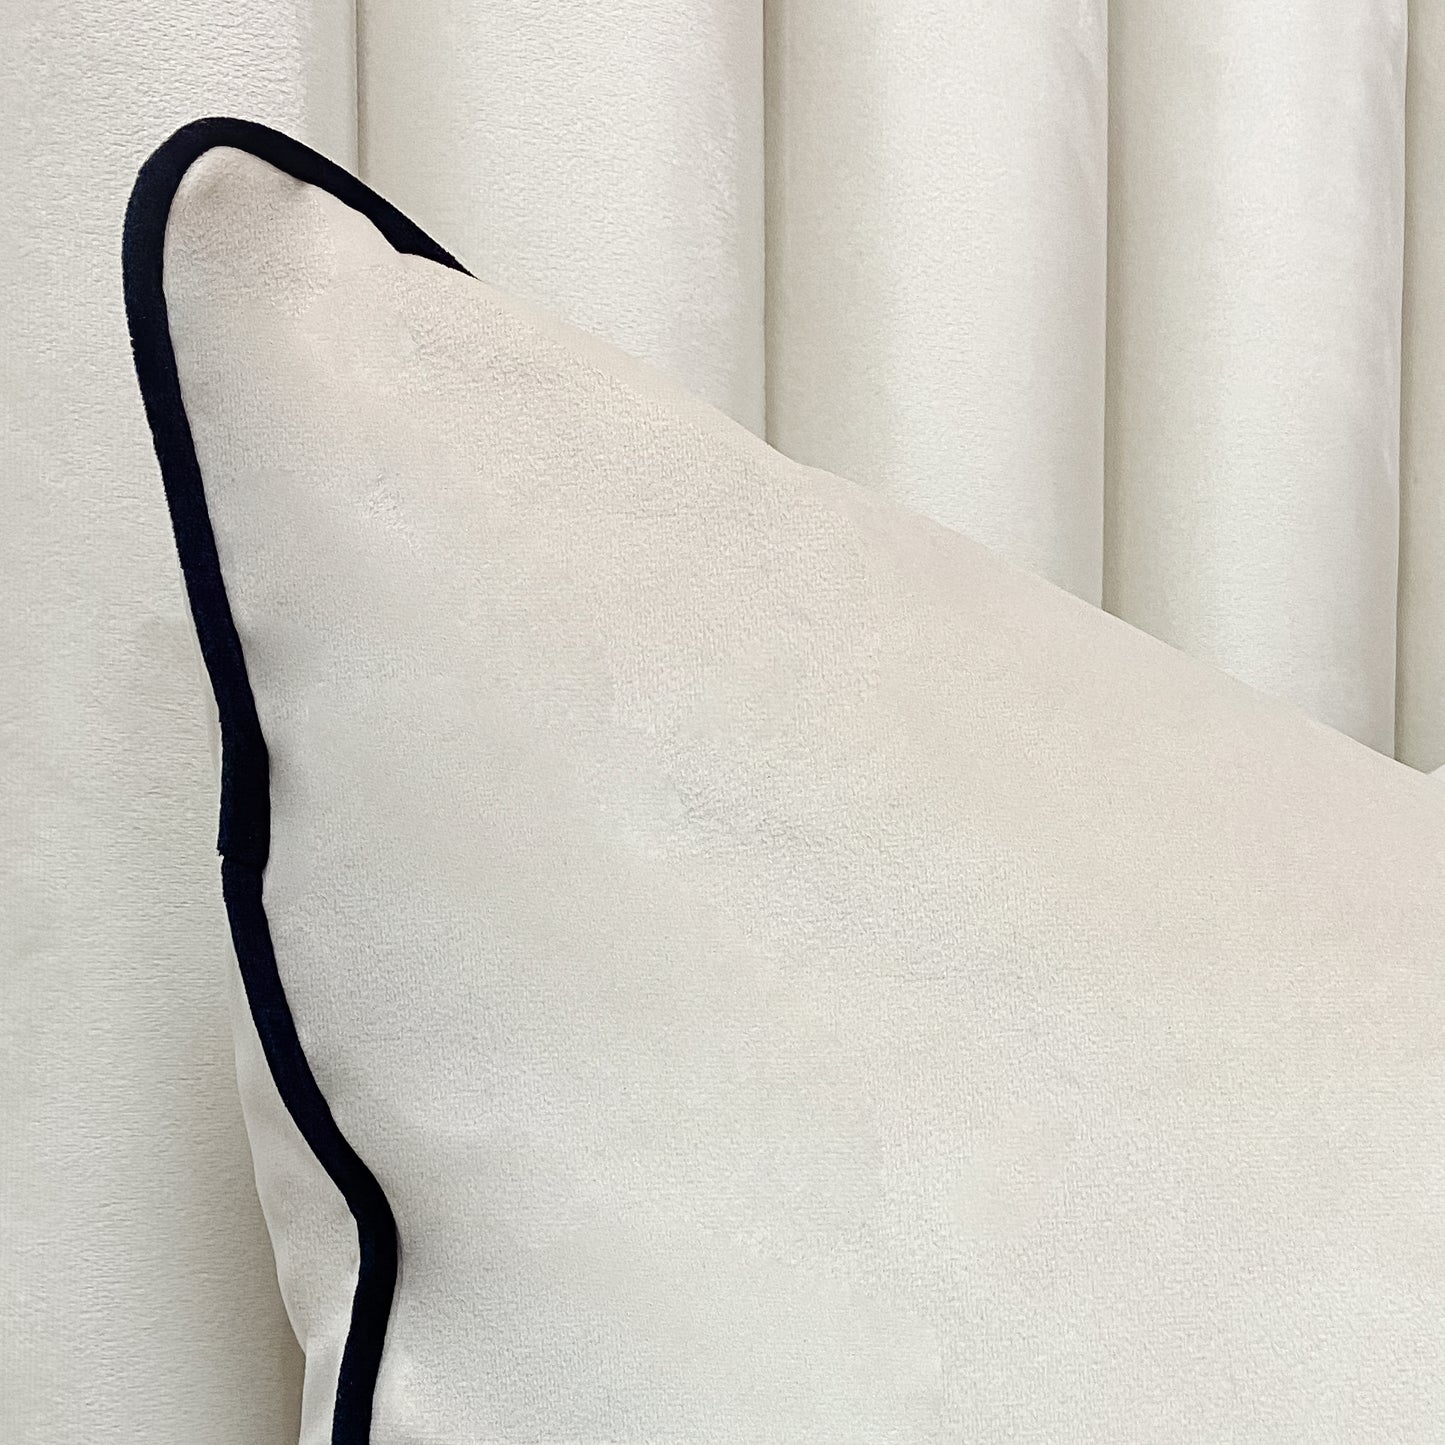 Ivory Velvet Cushion with Black Piping